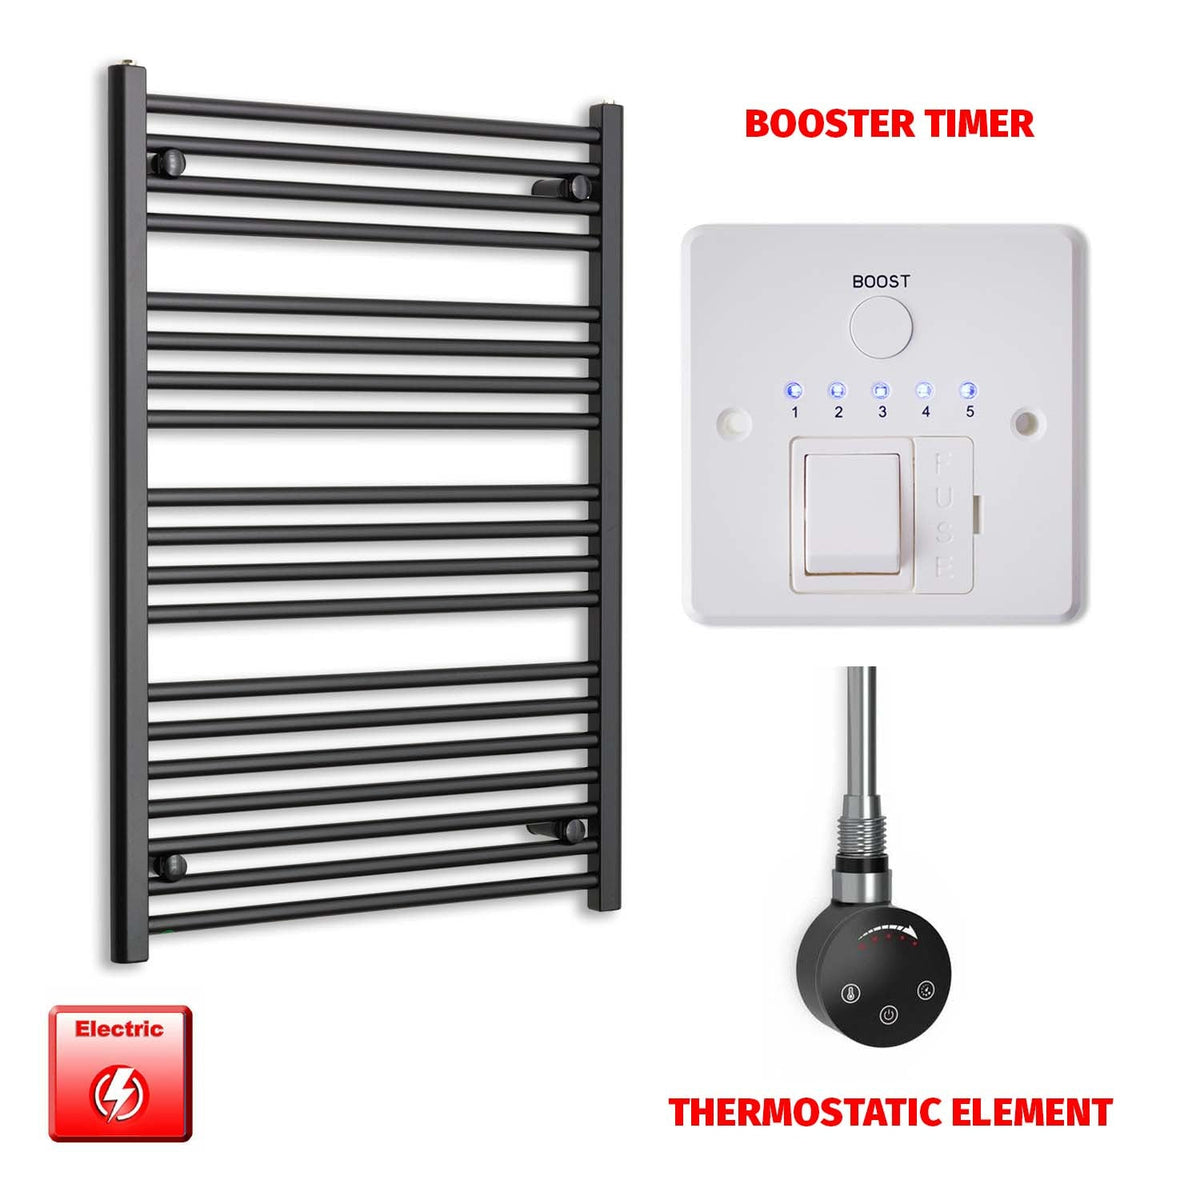 1000mm x 700mm Wide Flat Black Pre-Filled Electric Towel Radiator HTR Smart Thermostatic Booster Timer